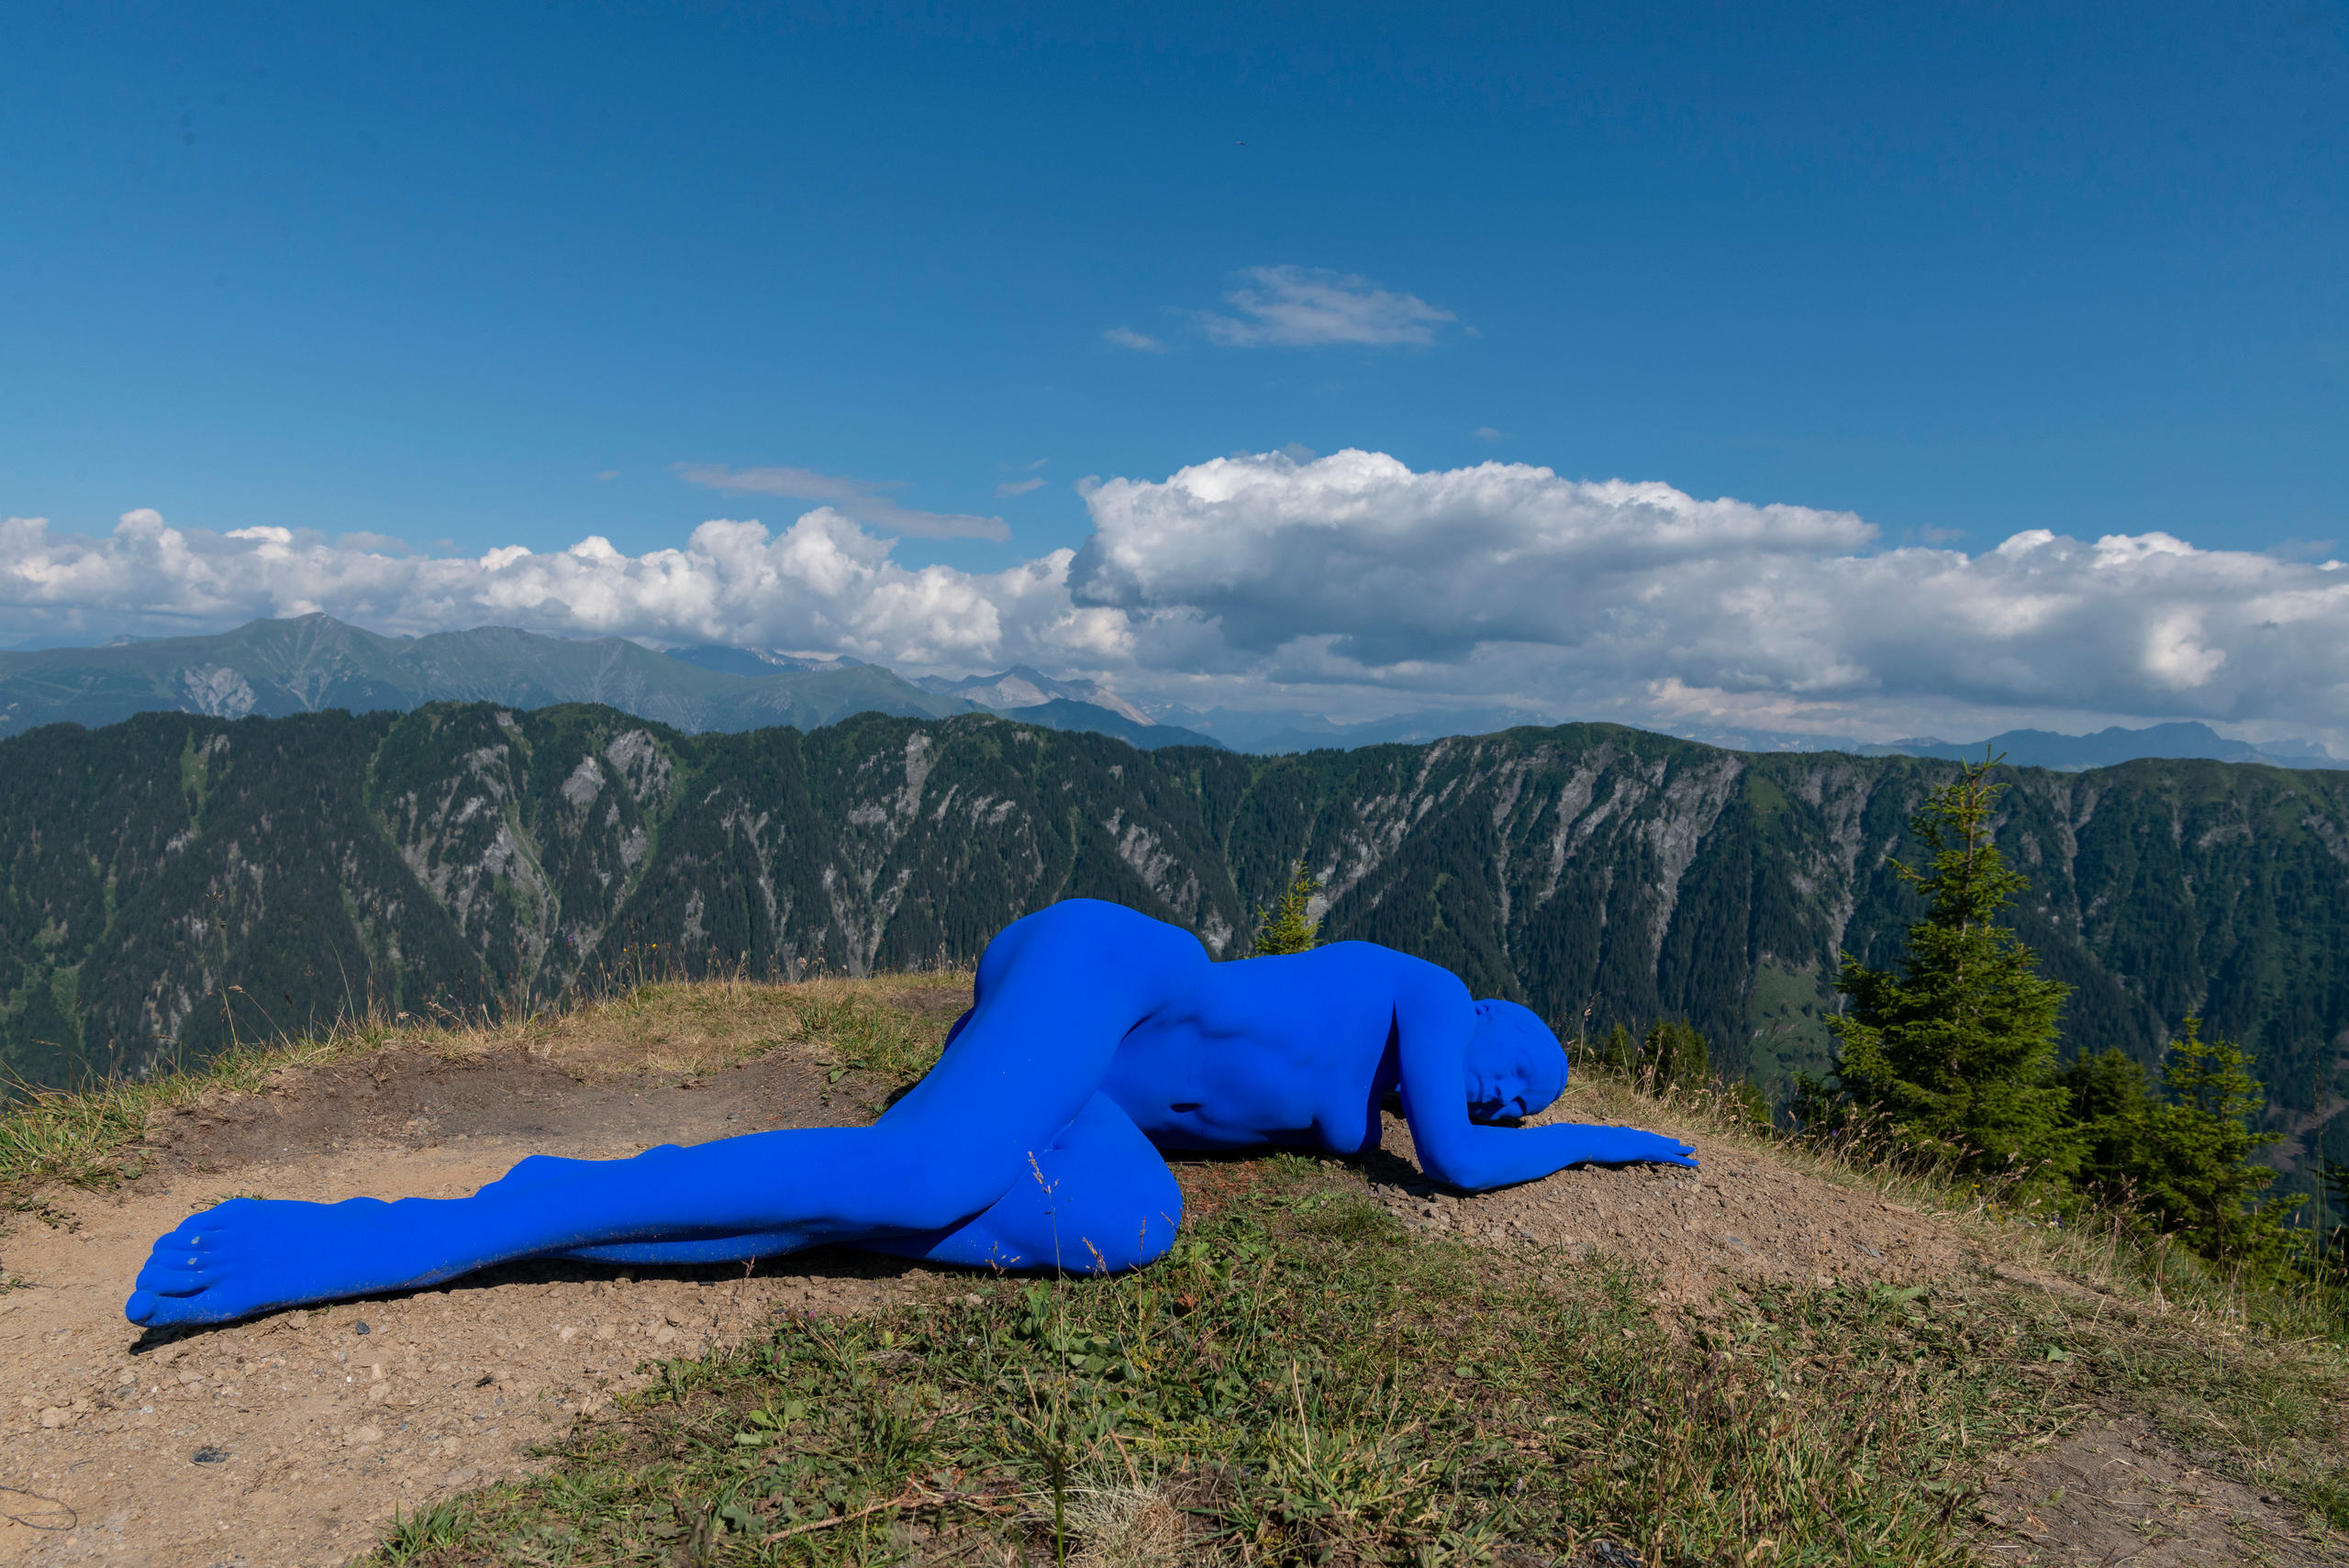 Blue figure lying on their side in the landscape.